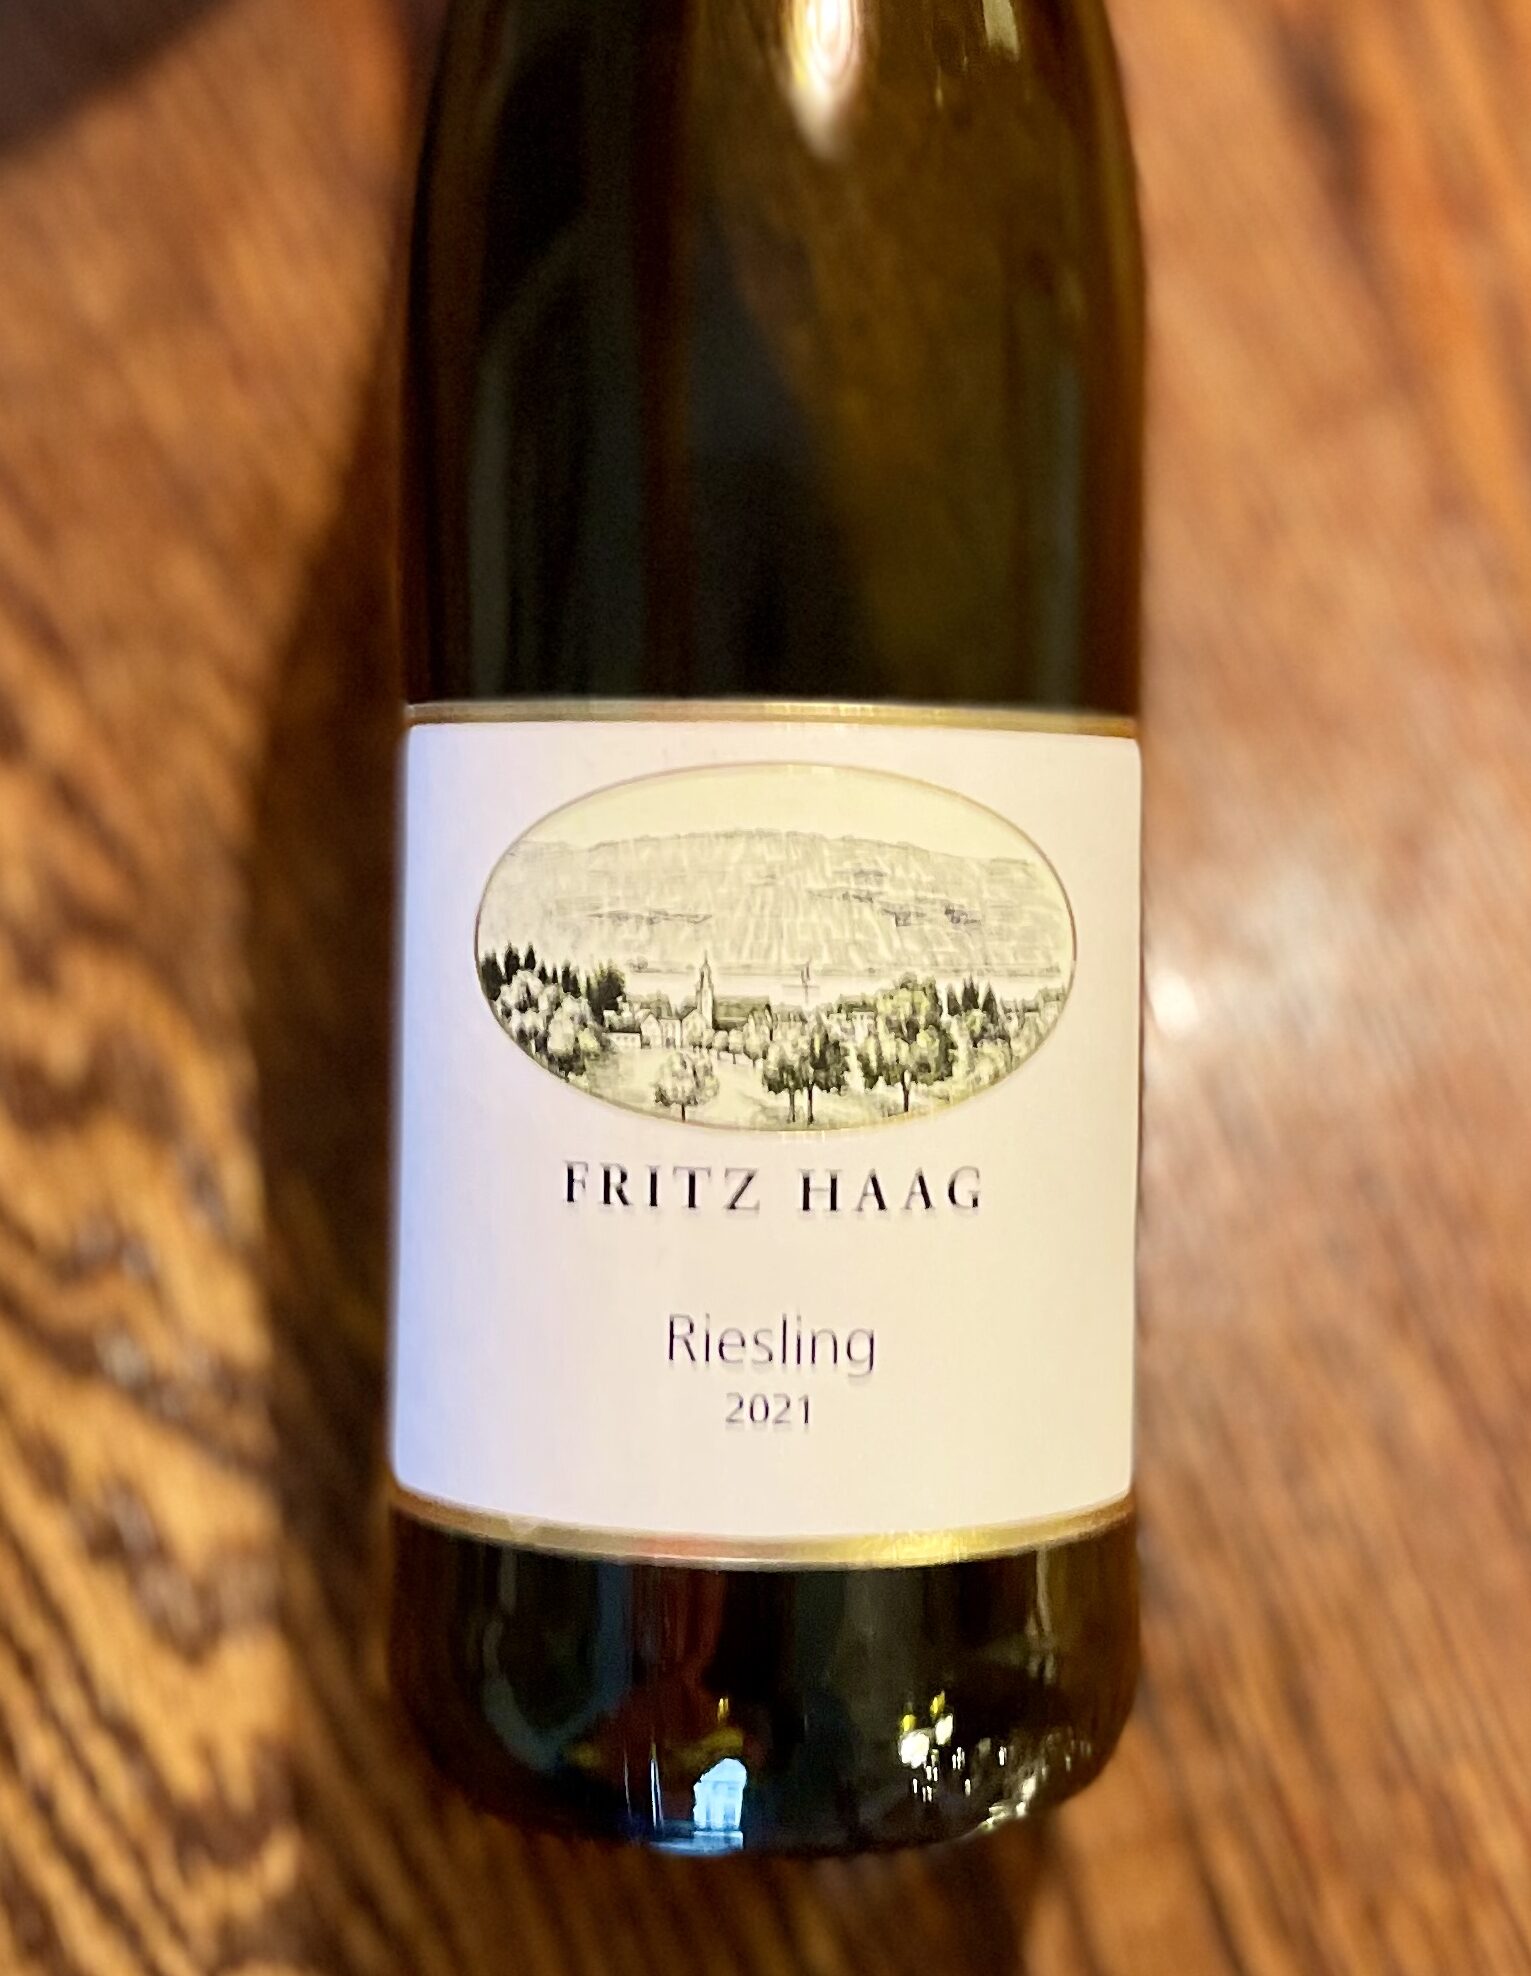 Brown glass wine bottle with small white label featuring drawn image of vineyards and the words FRITZ HAAG RIESLING 2021